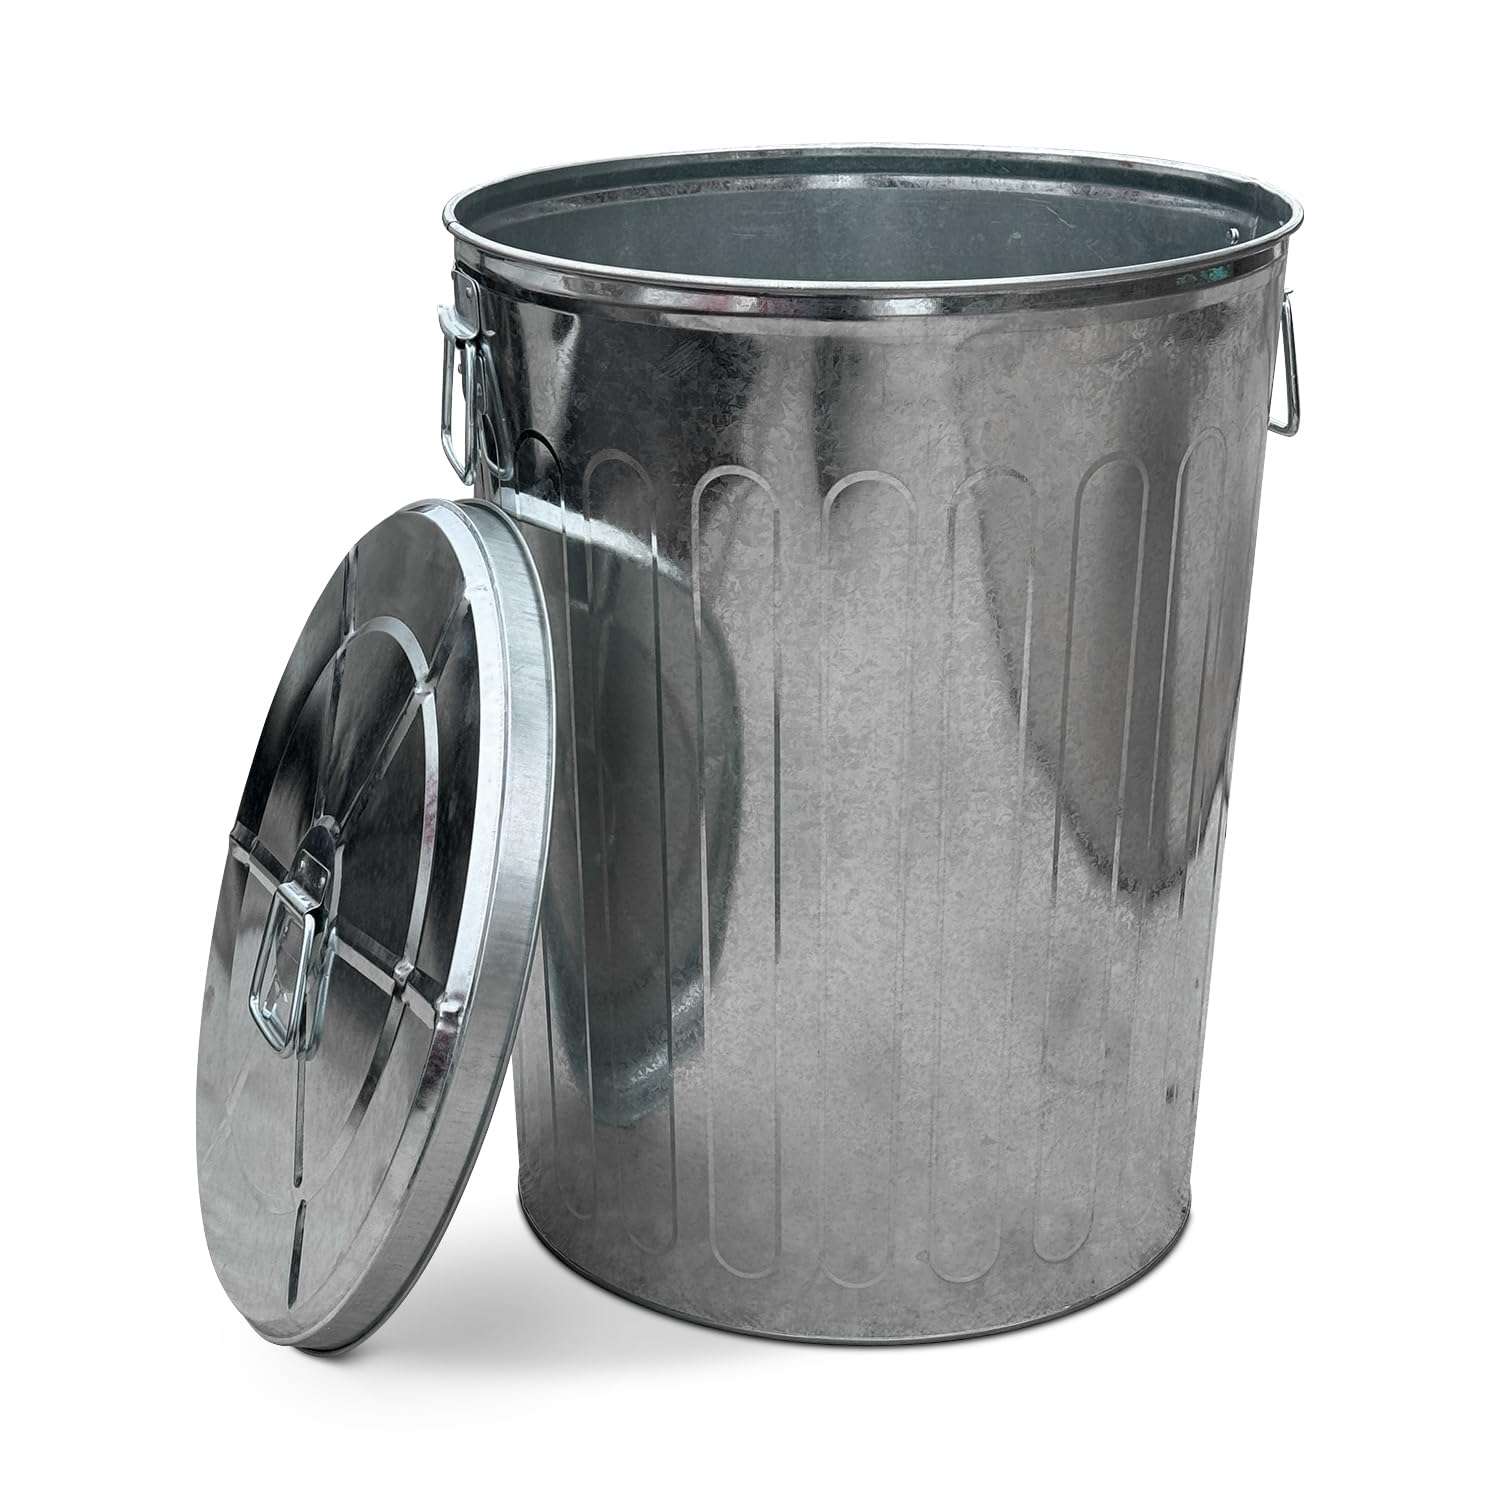 20 Gal Galvanized Steel Round Trash Can with Lid - 1